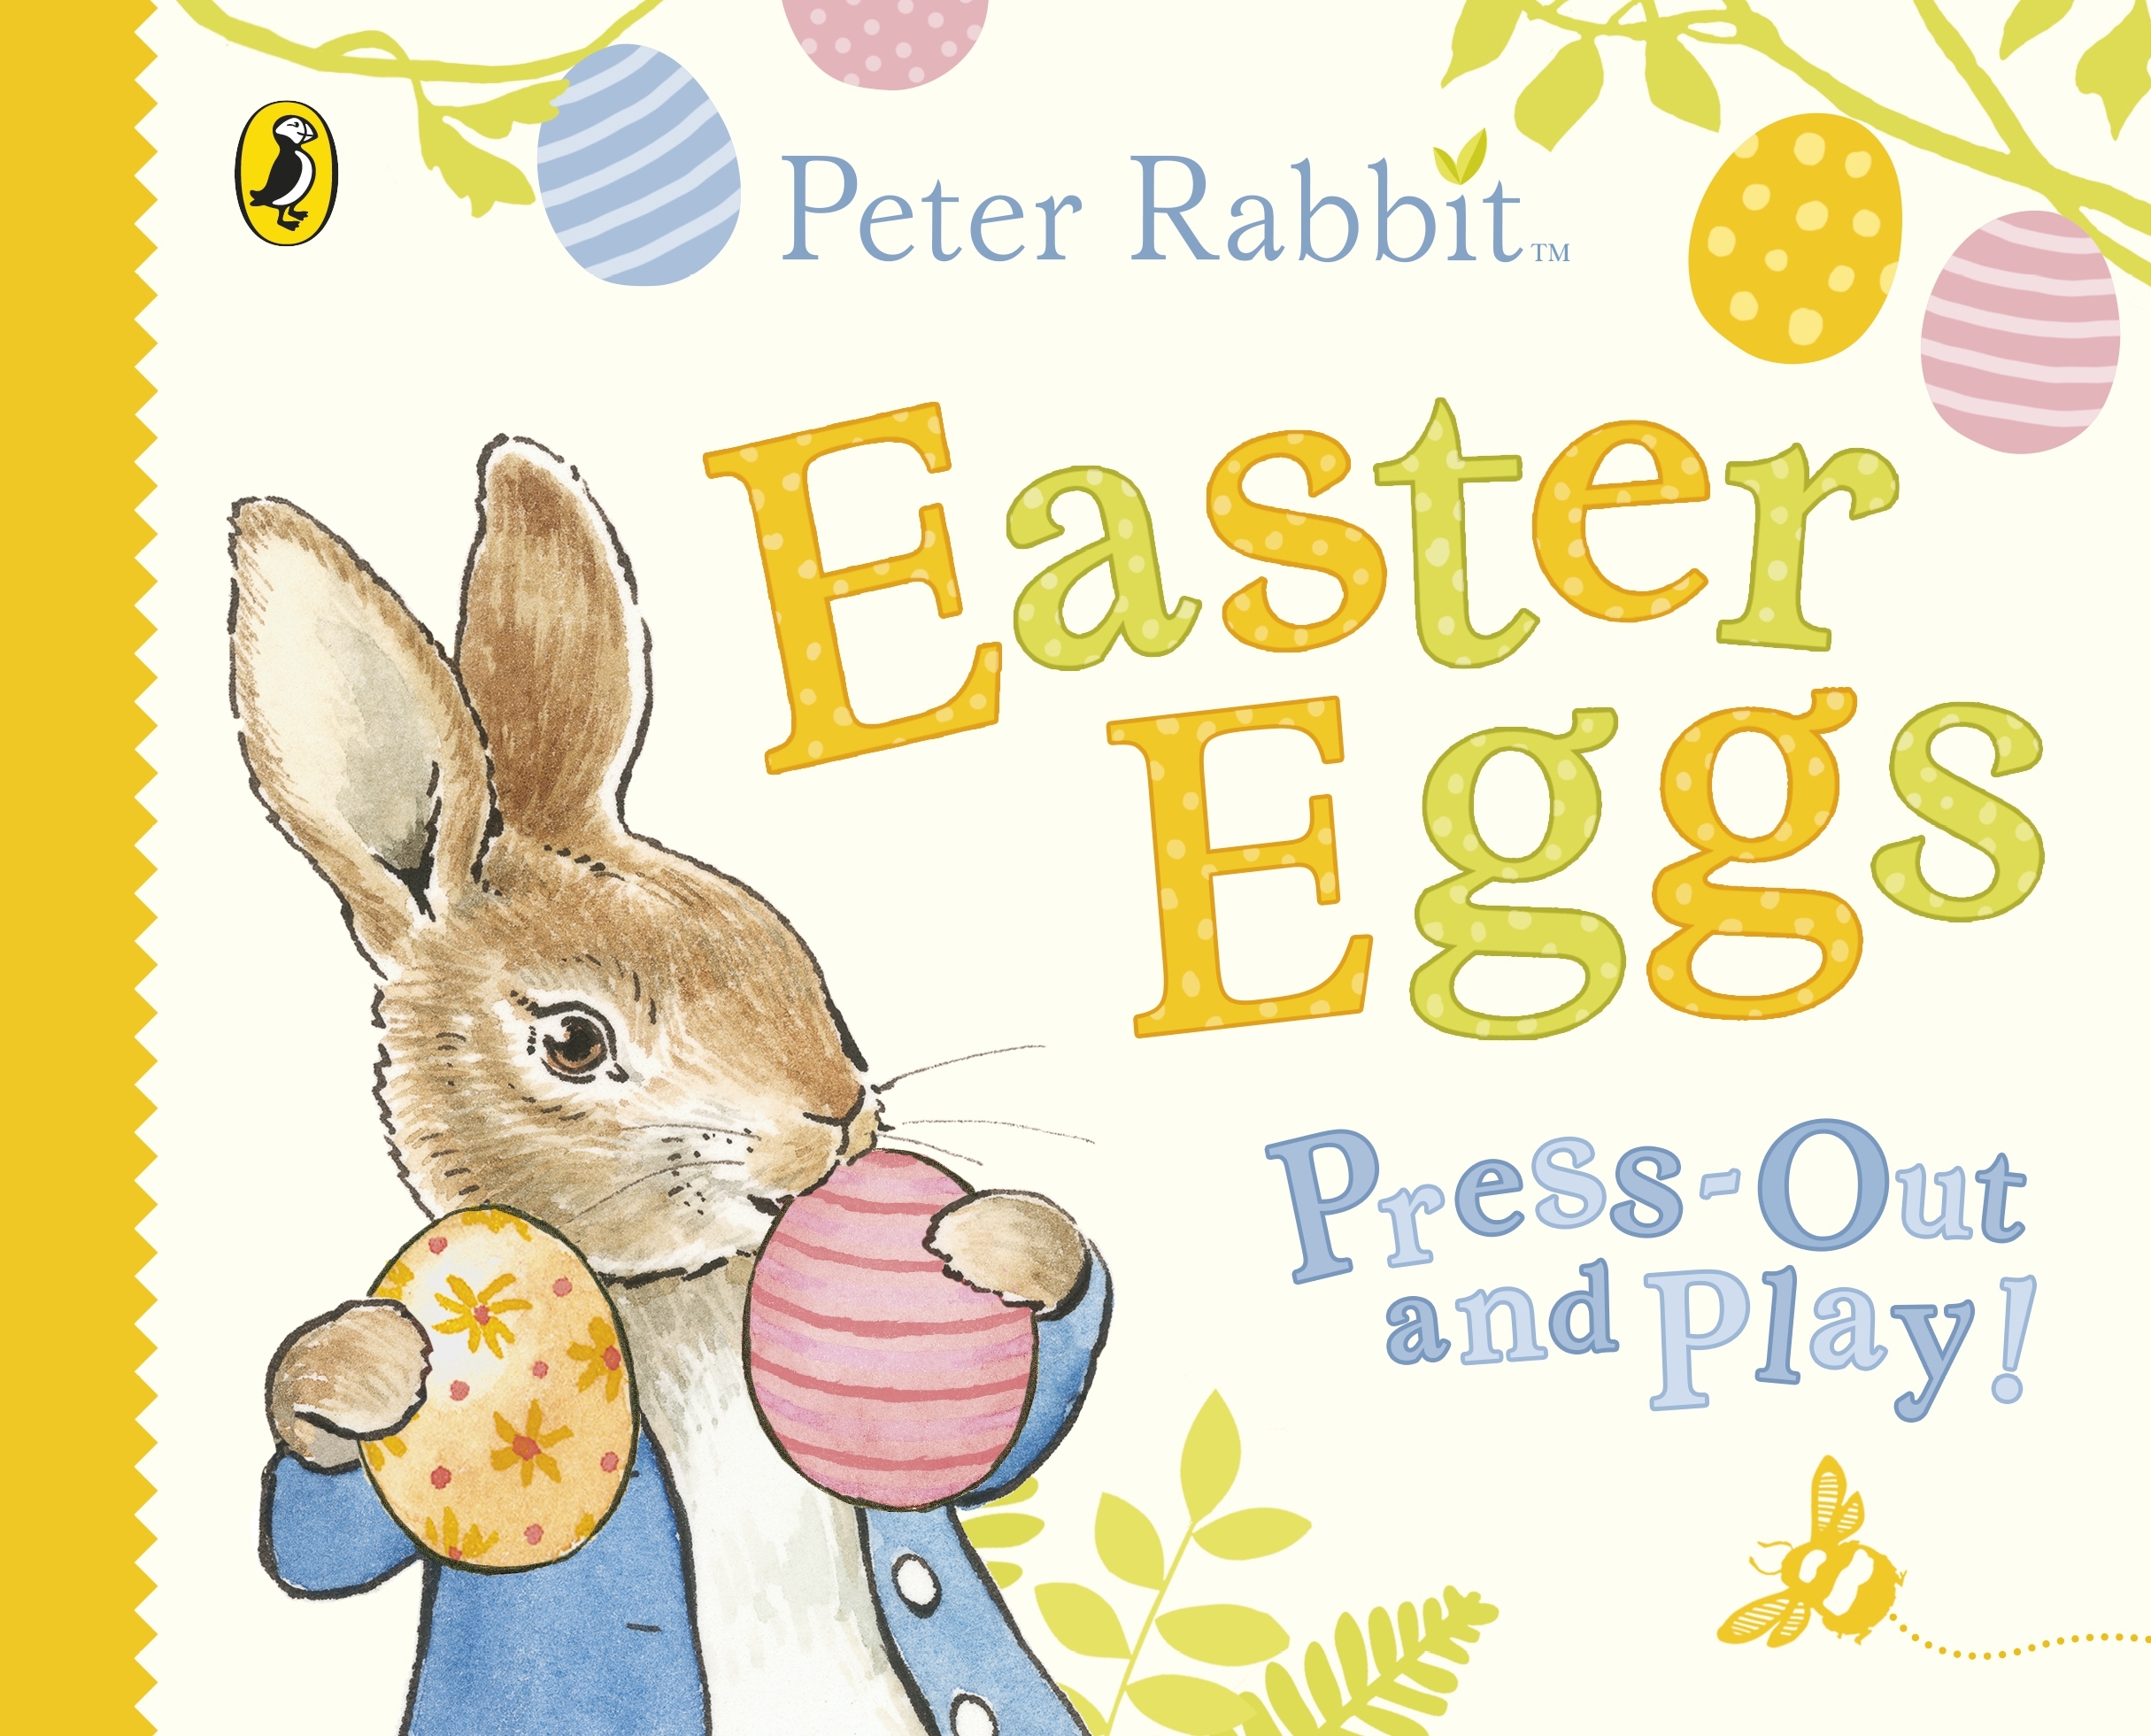 Pressed out. Peter Rabbit Easter. Peter Rabbit Easter Eggs. Peter Rabbit. Board book. Peter Rabbit Easter Eggs Press out and Play.